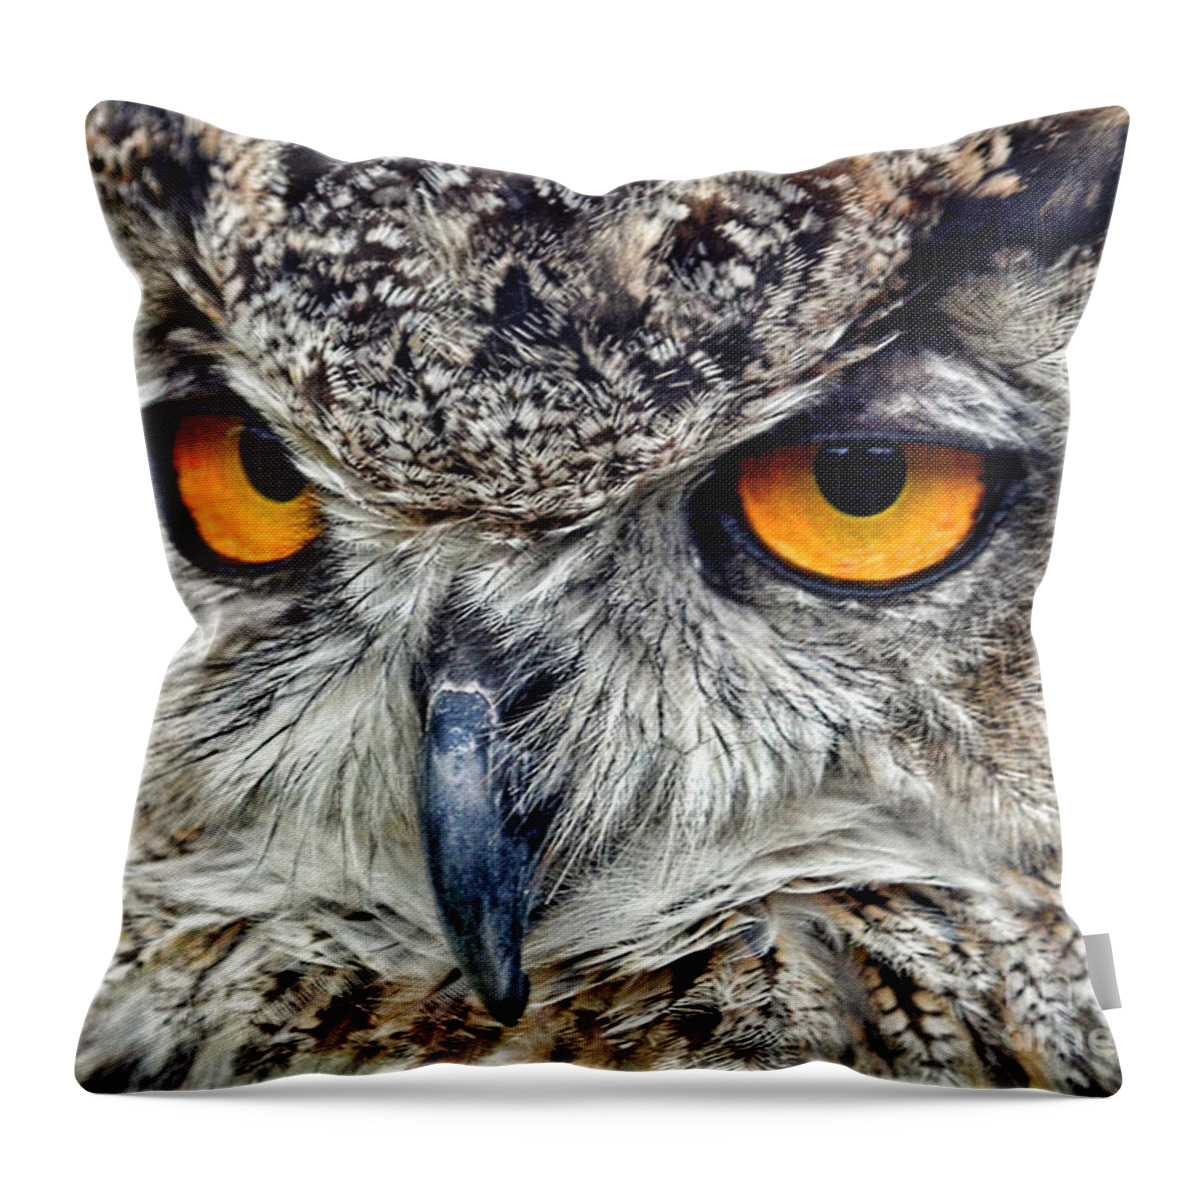 Jim Fitzpatrick Throw Pillow featuring the photograph Great Horned Owl Closeup by Jim Fitzpatrick